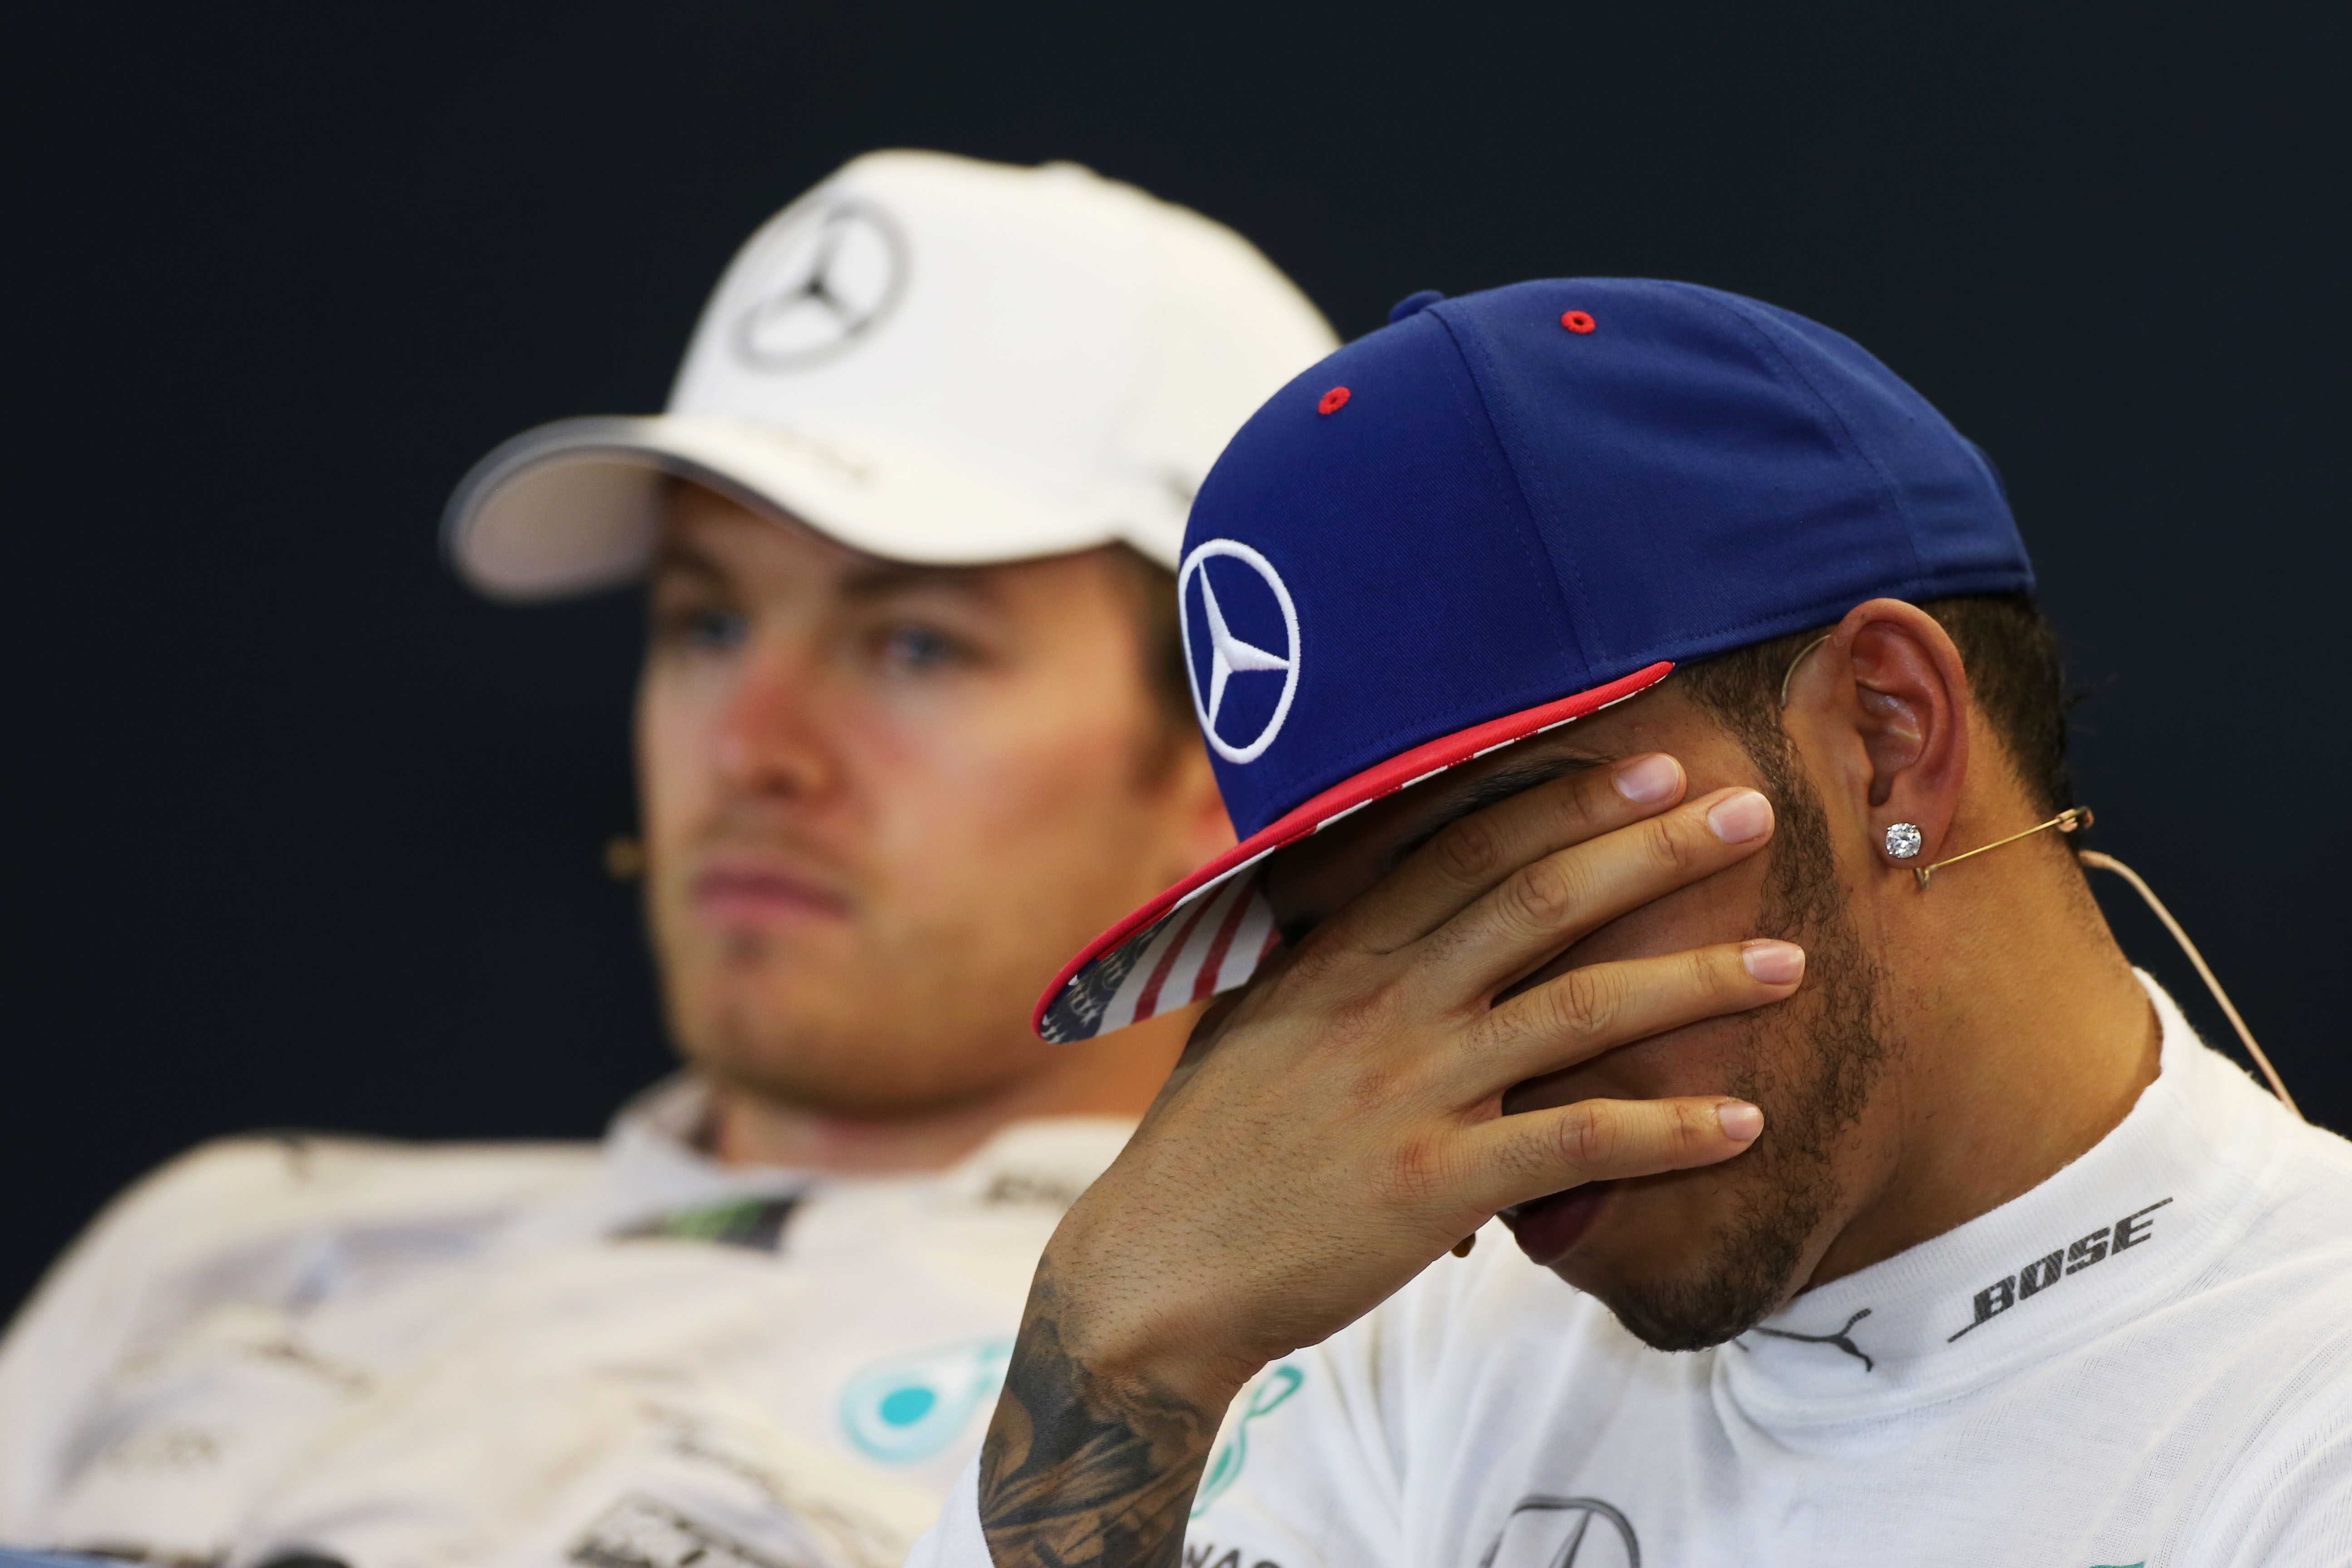 How will the season end for the Mercedes duo of Lewis Hamilton and Nico Rosberg at Abu Dhabi?